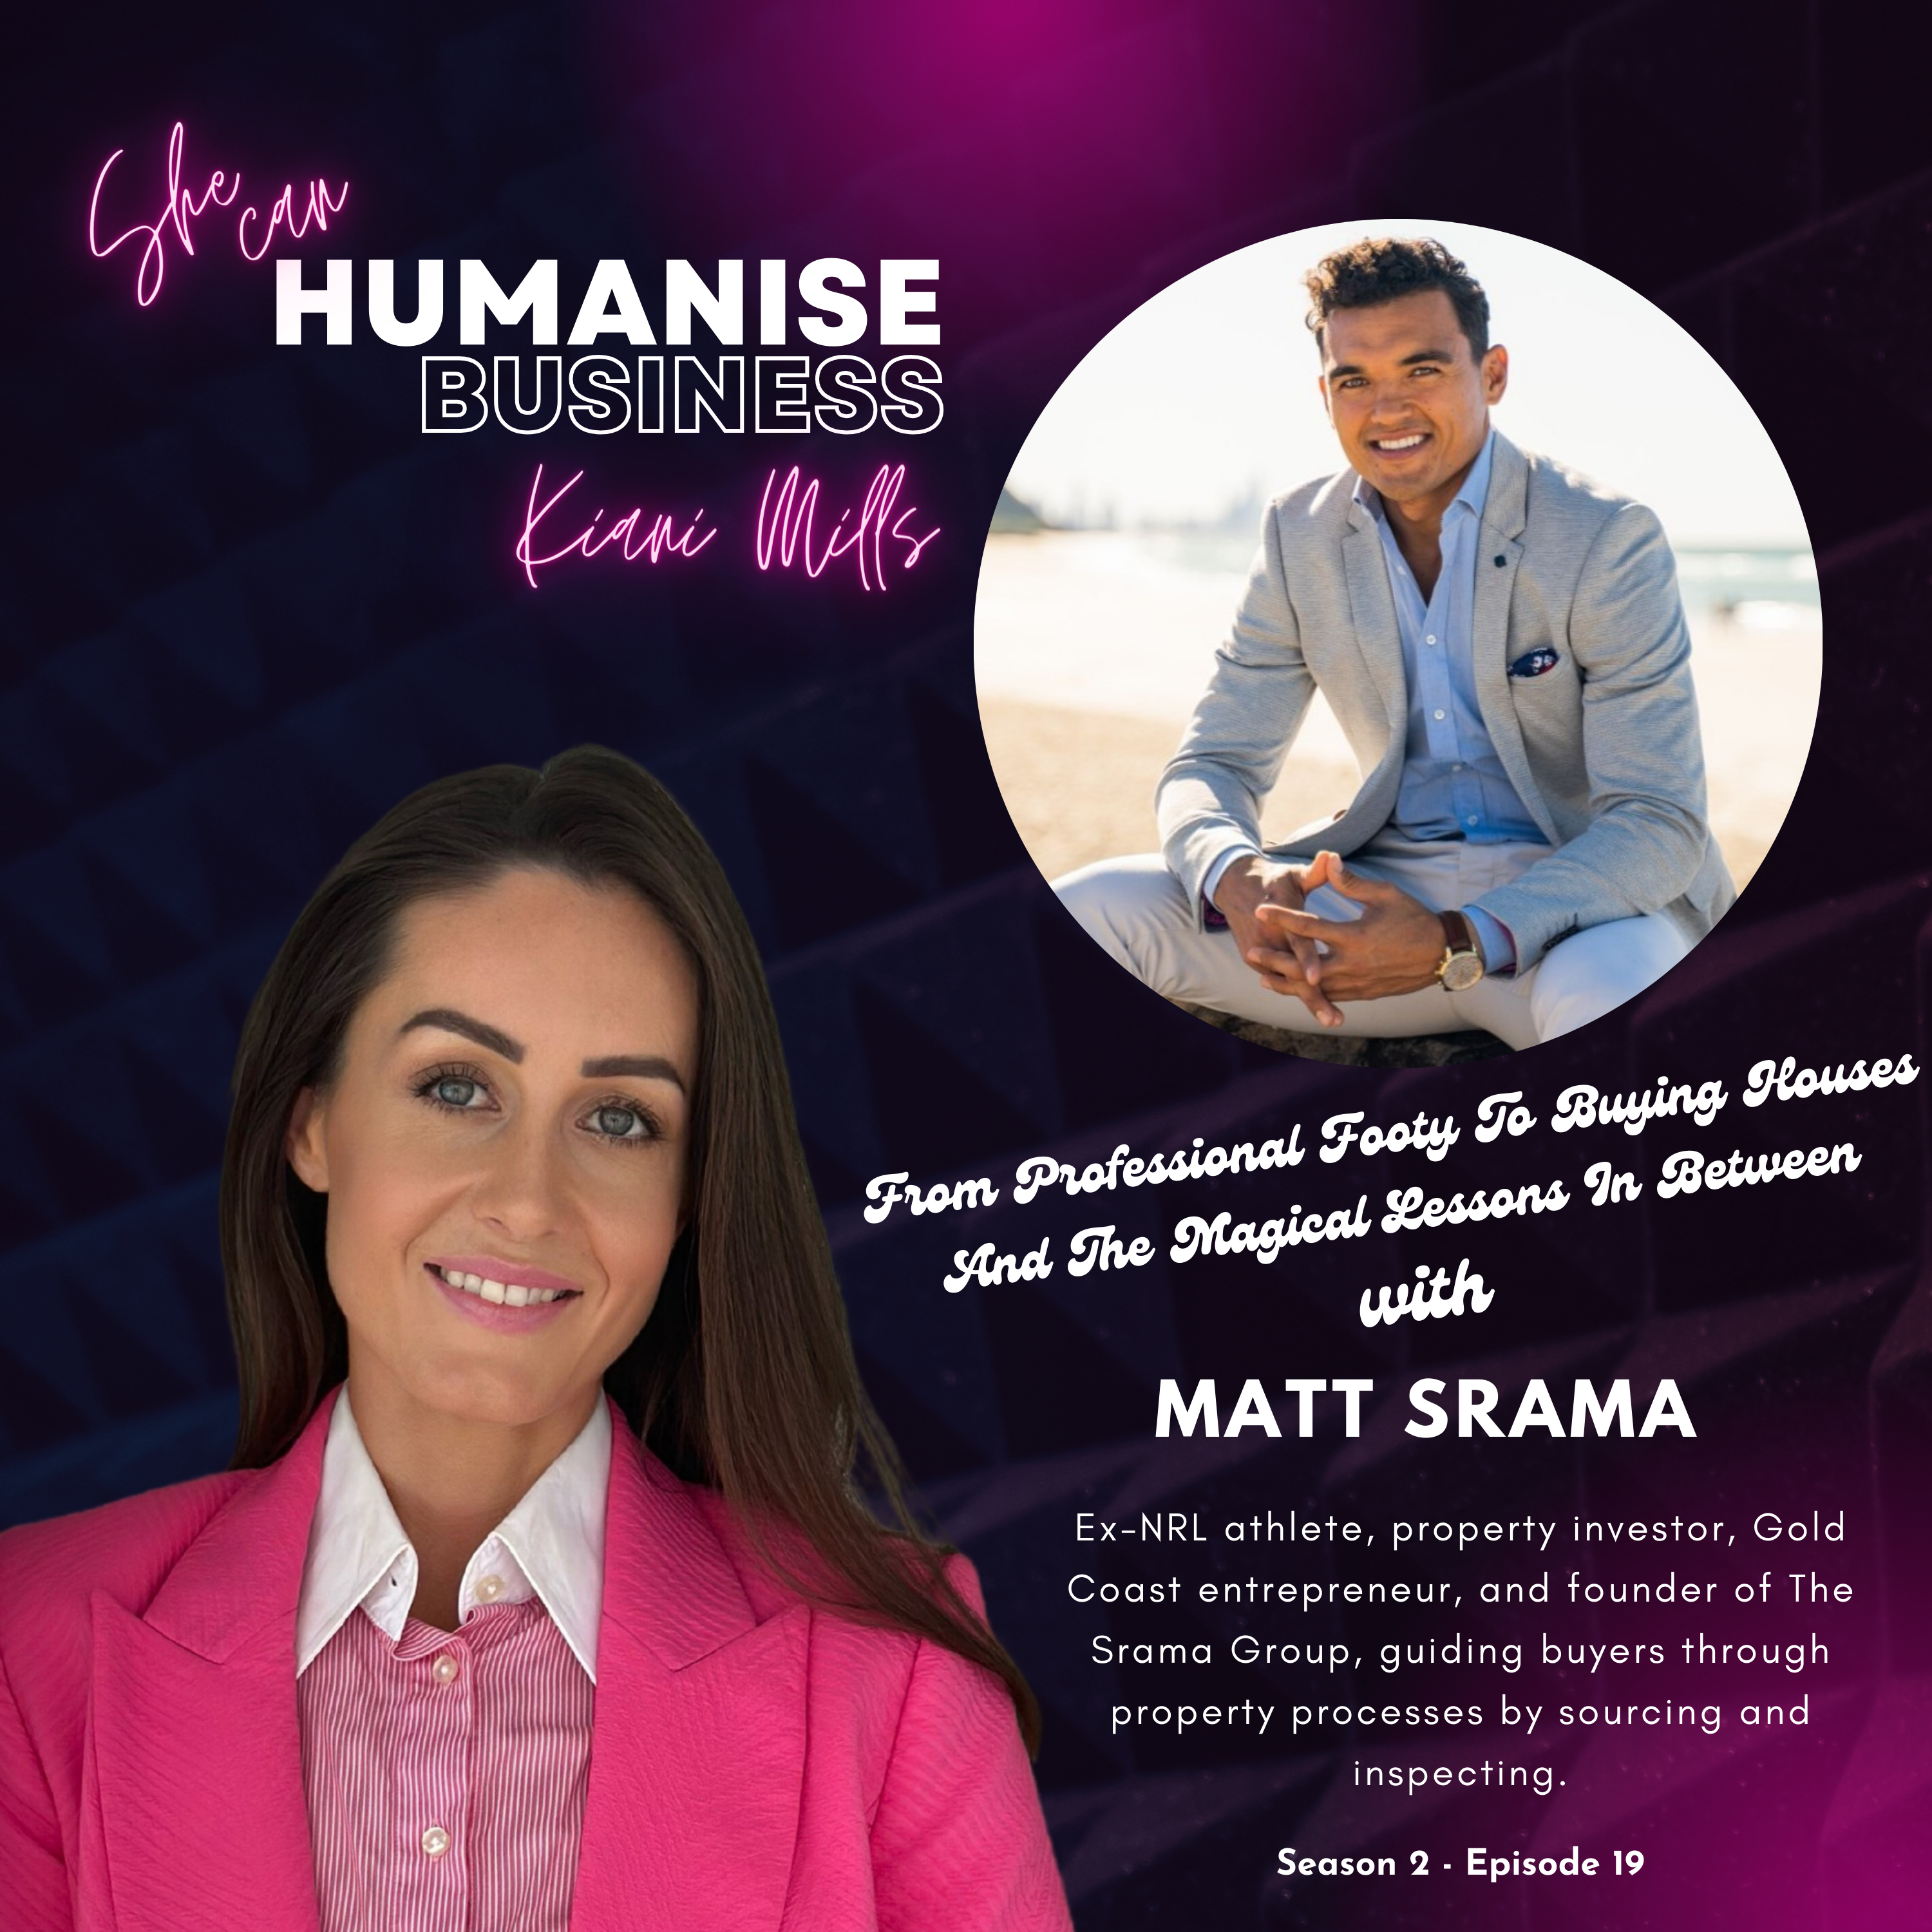 From Professional Footy To Buying Houses And The Magical Lessons In Between with Matt Srama